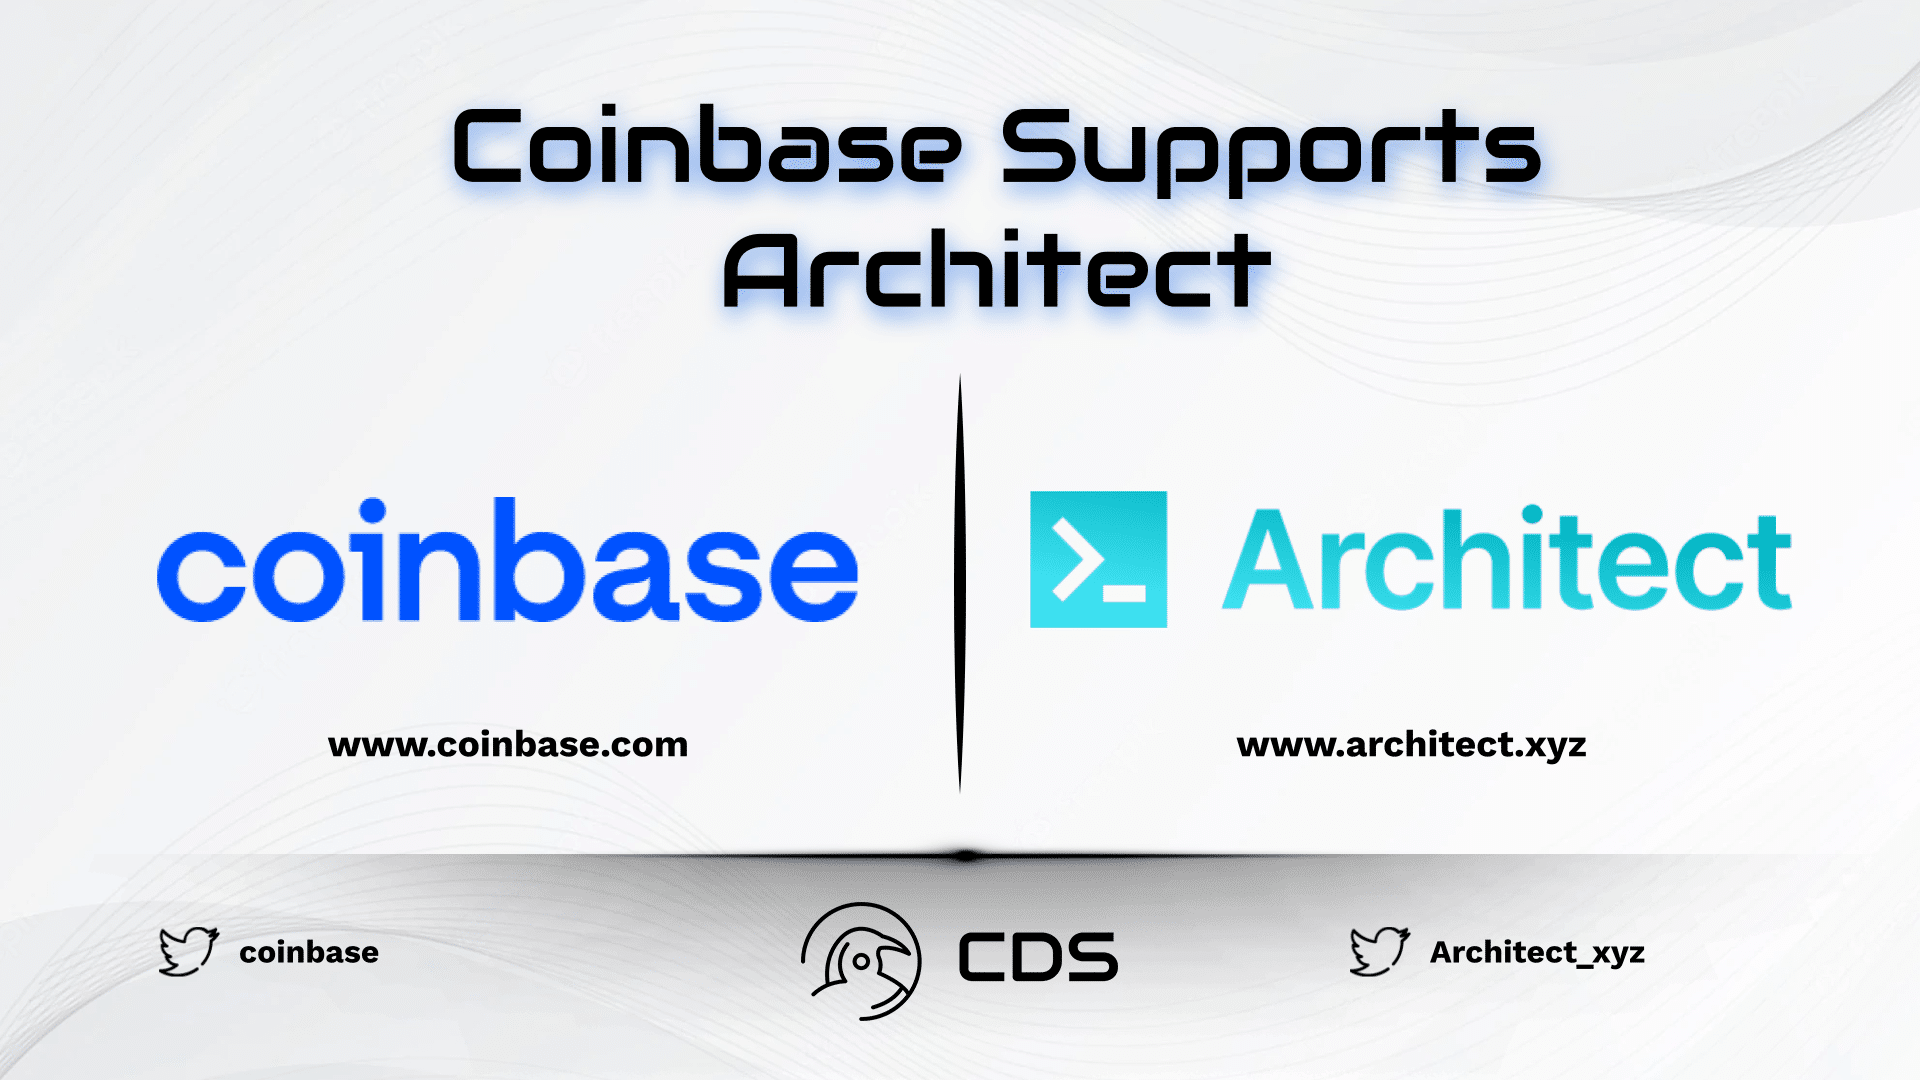 Coinbase Supports Architect